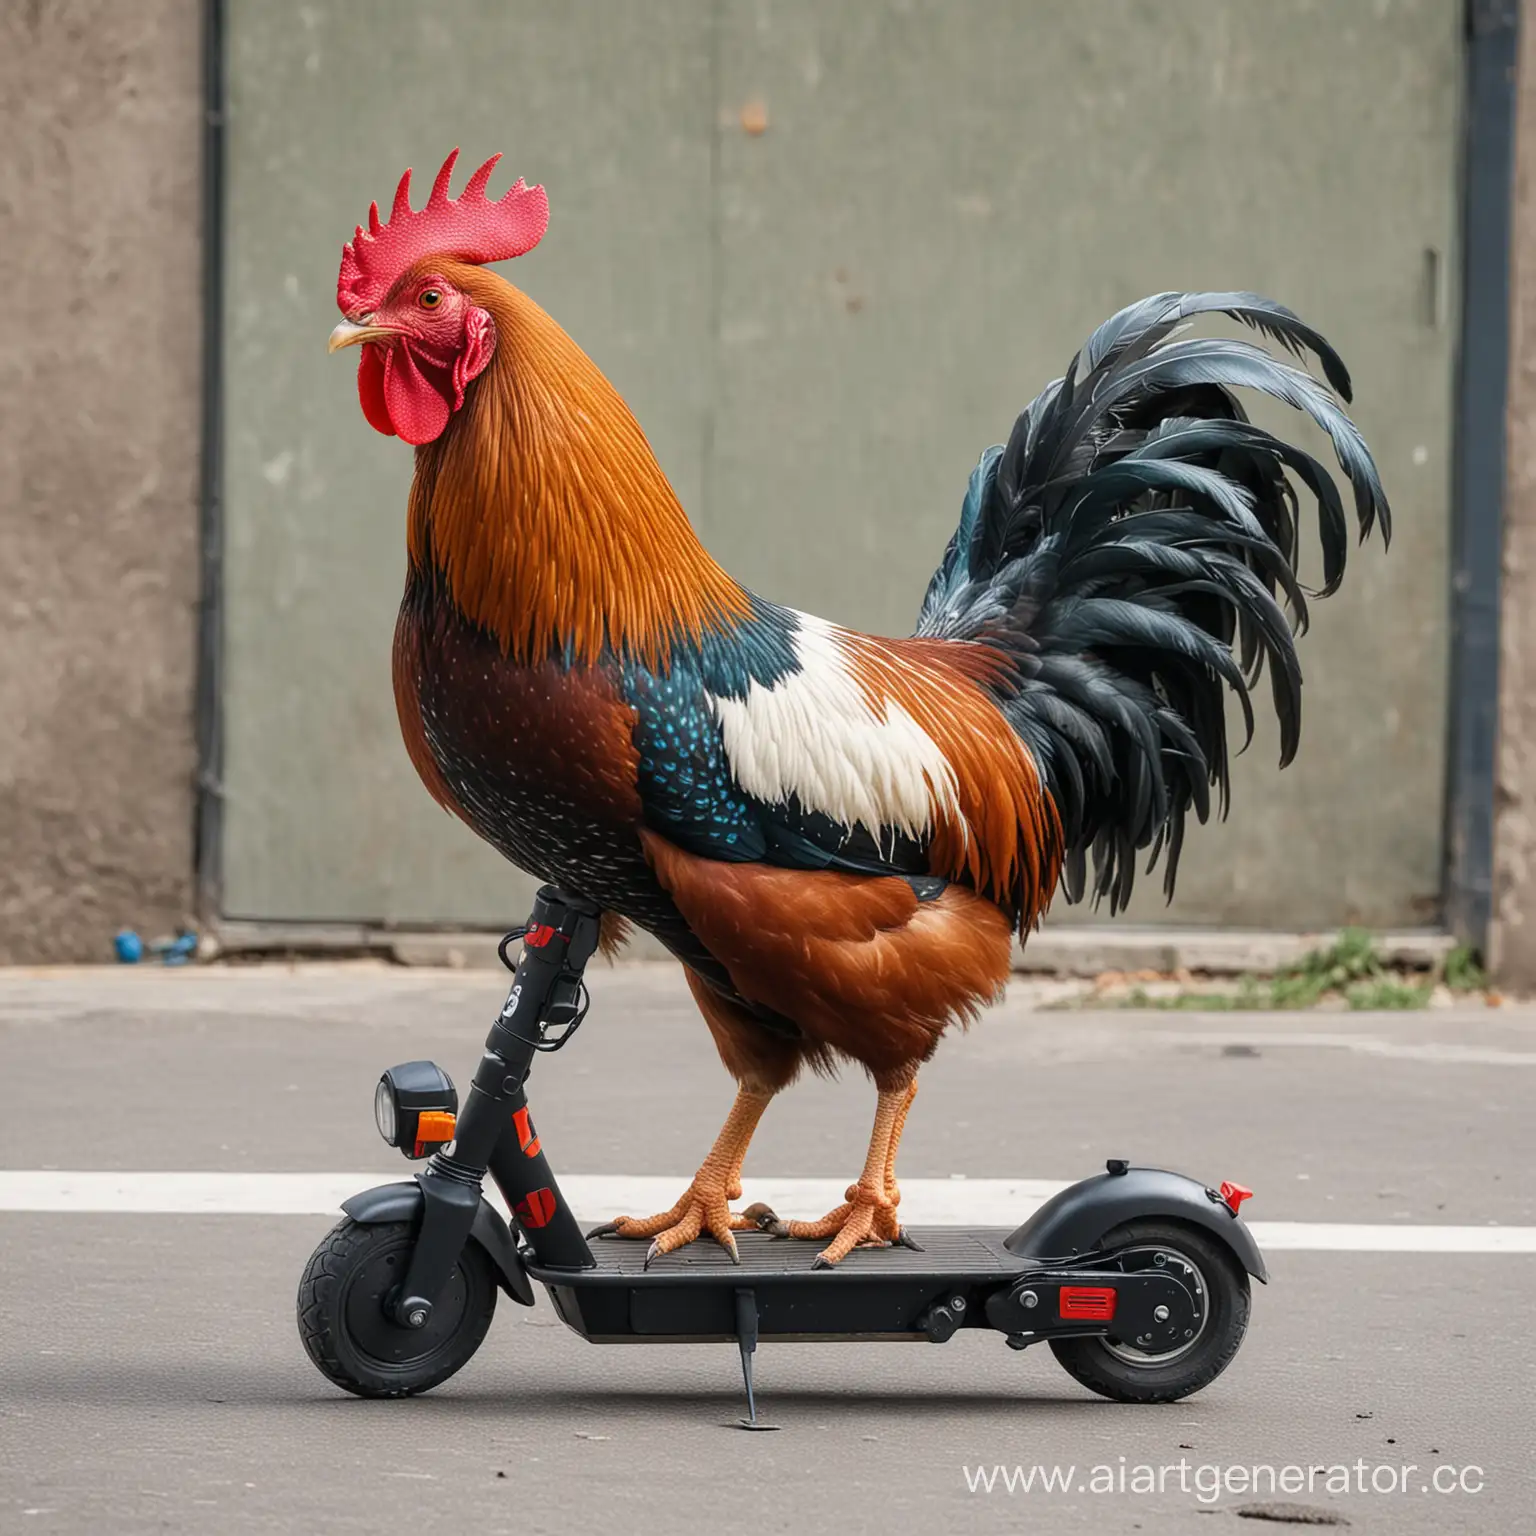 Rooster-Riding-Electric-Scooter-Playful-Bird-Transportation-in-Urban-Setting